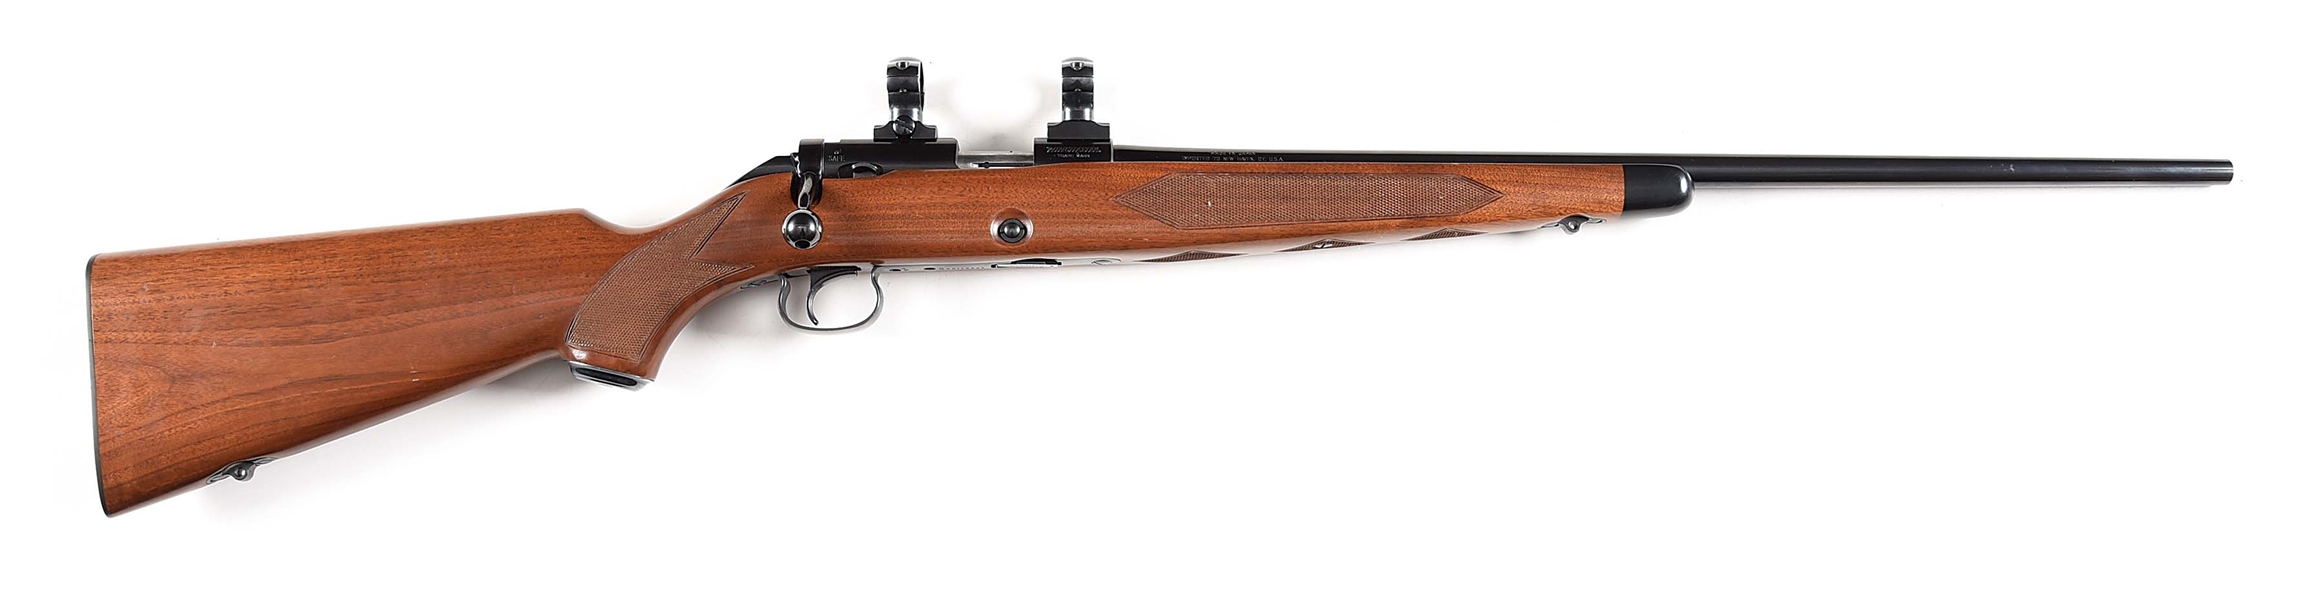 (M) JAPANESE MADE WINCHESTER MODEL 52 BOLT ACTION RIFLE.